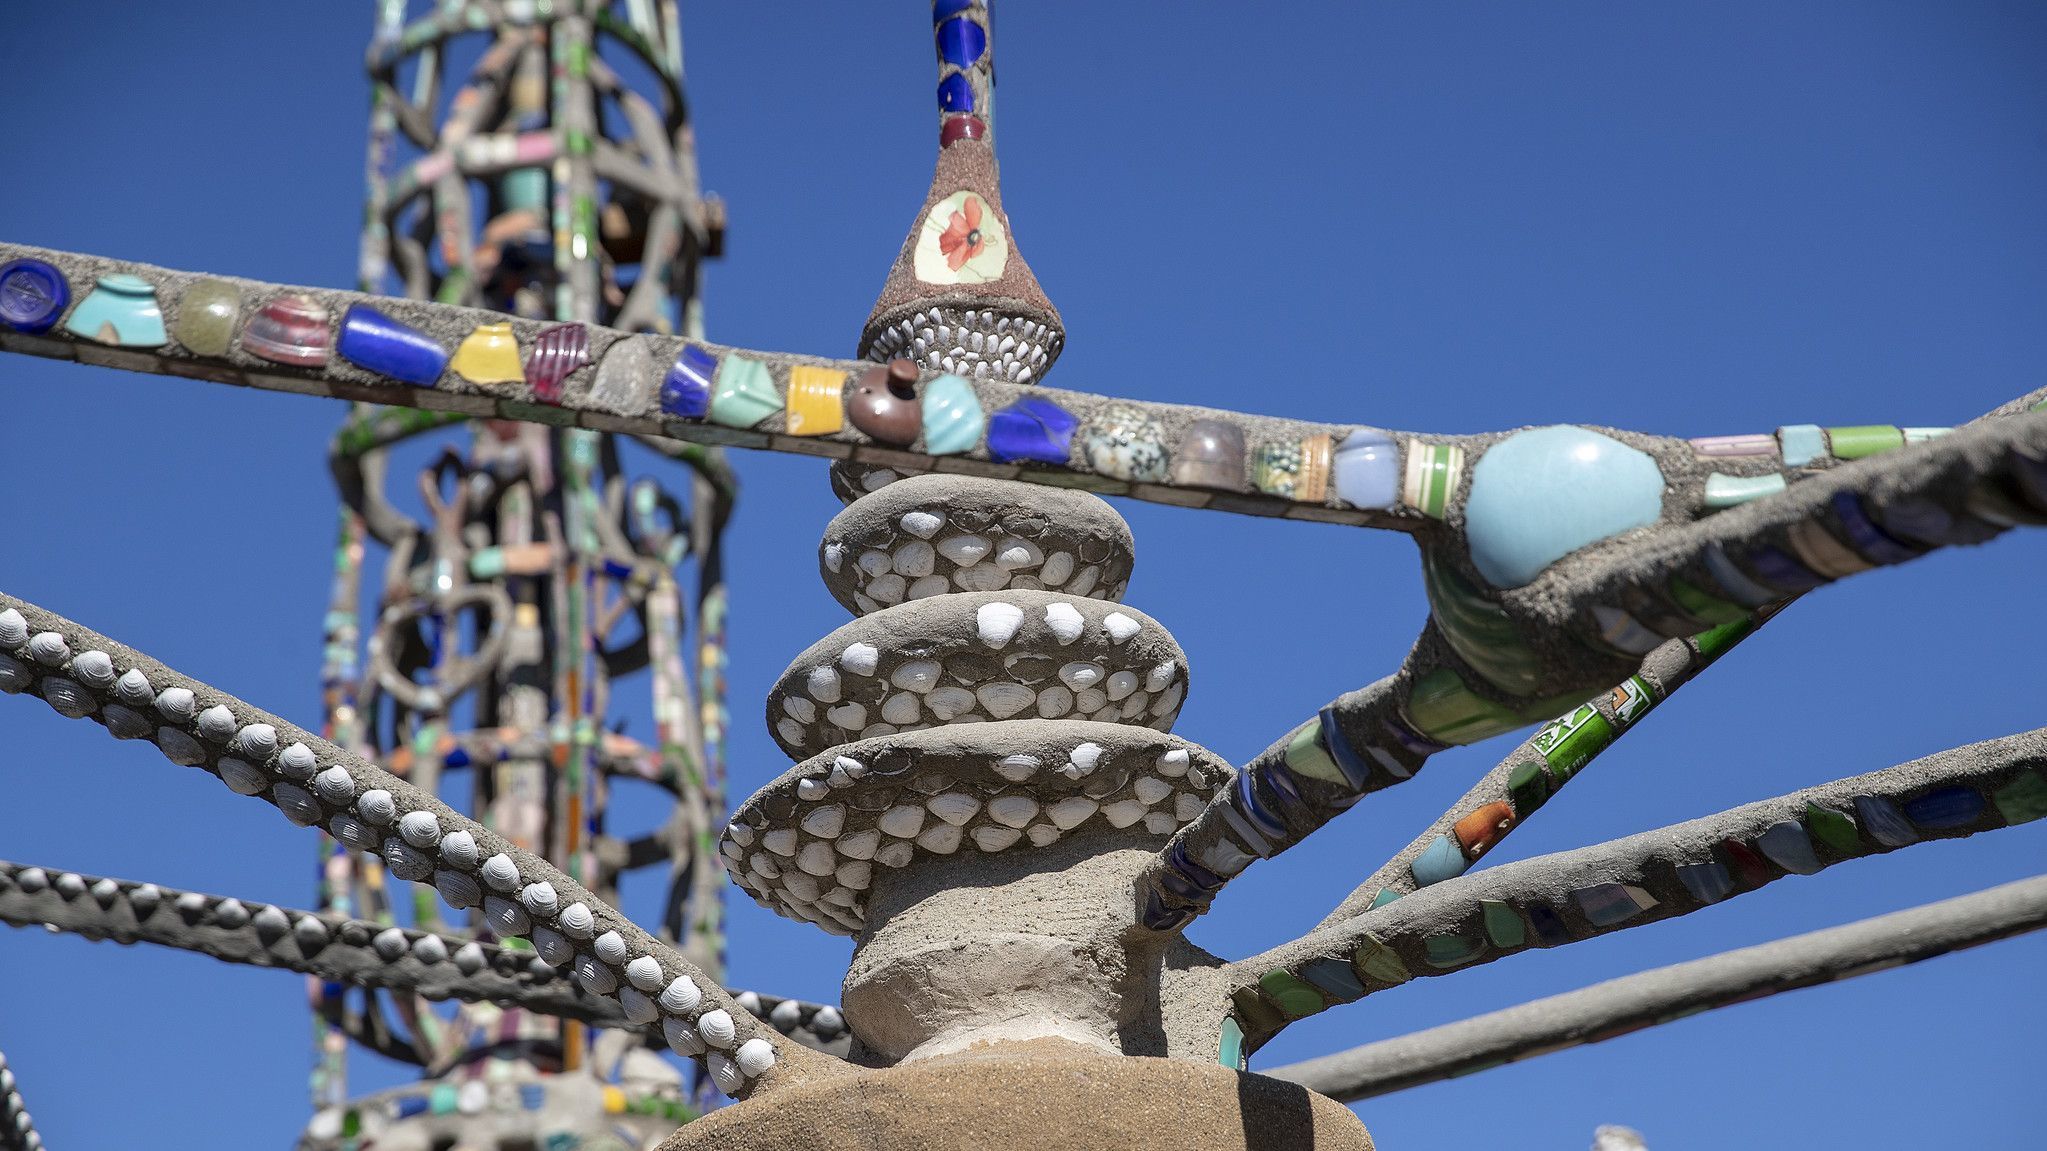 WATTS, CALIF. — WEDNESDAY, NOVEMBER 14, 2018: A view of shells imbedded in the Watts Towers by Saba